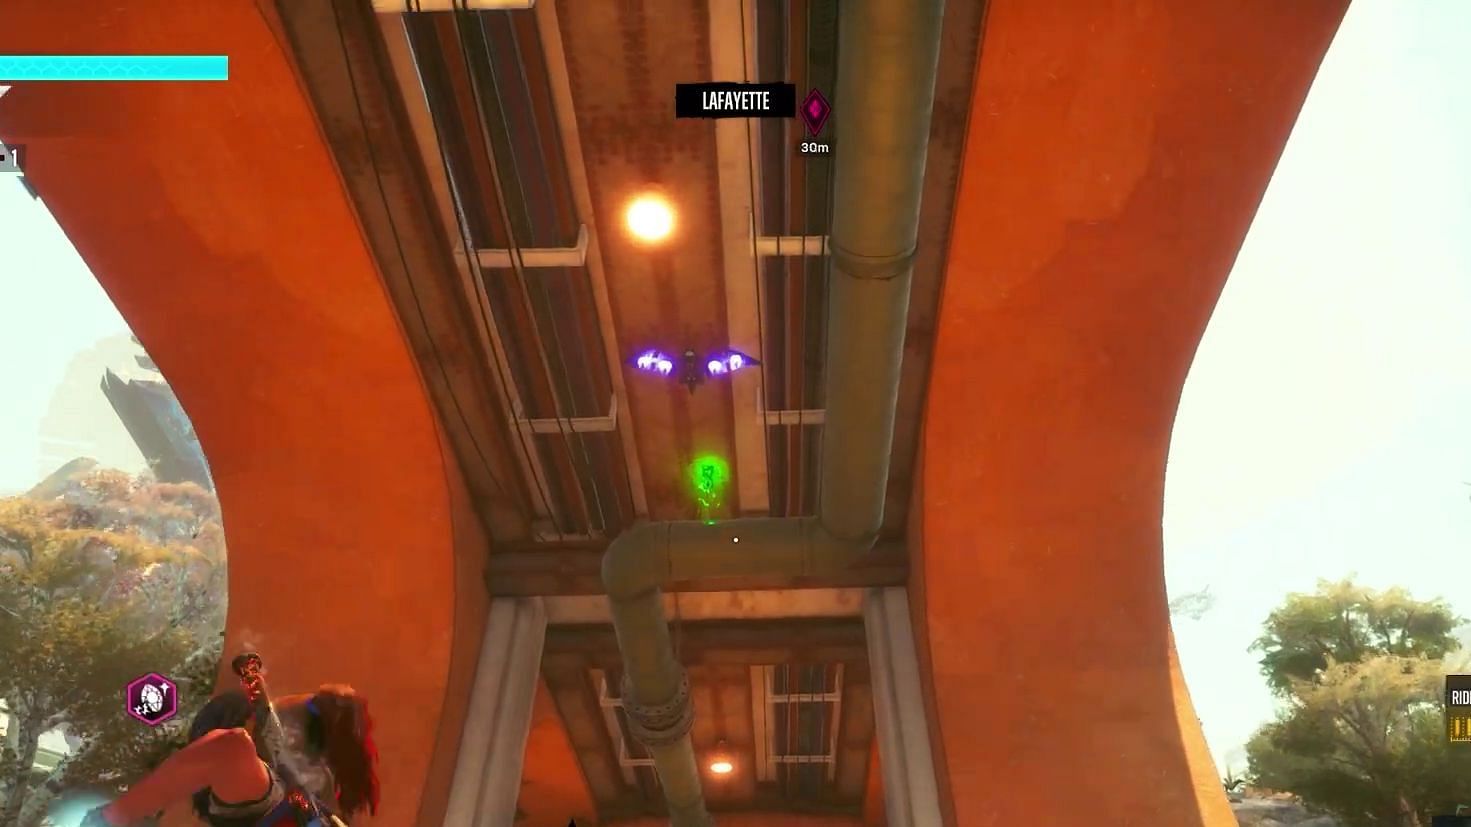 Can be found hanging upside down (Image via YouTube/Pixelz)